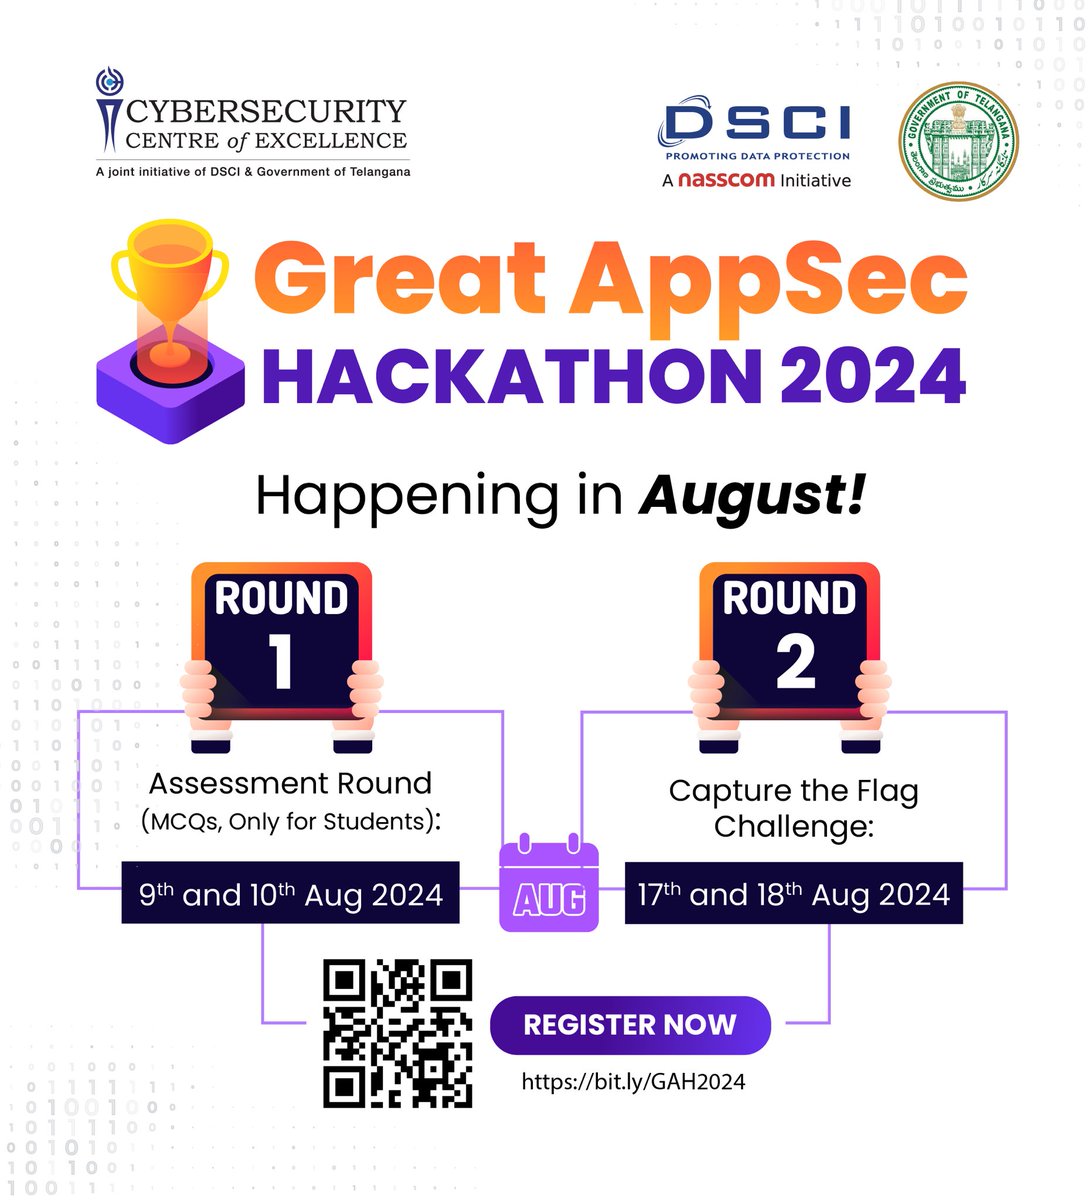 🔥#DateReveal
Gear up to conquer!

Dive into the action-packed Great AppSec Hackathon, happening this August.

Round 1 - Assessment Round (MCQs): 9th and 10th August, 2024

Round 2 - Capture the flag challenge: 17th and 18th August, 2024

Register Now - bit.ly/GAH2024